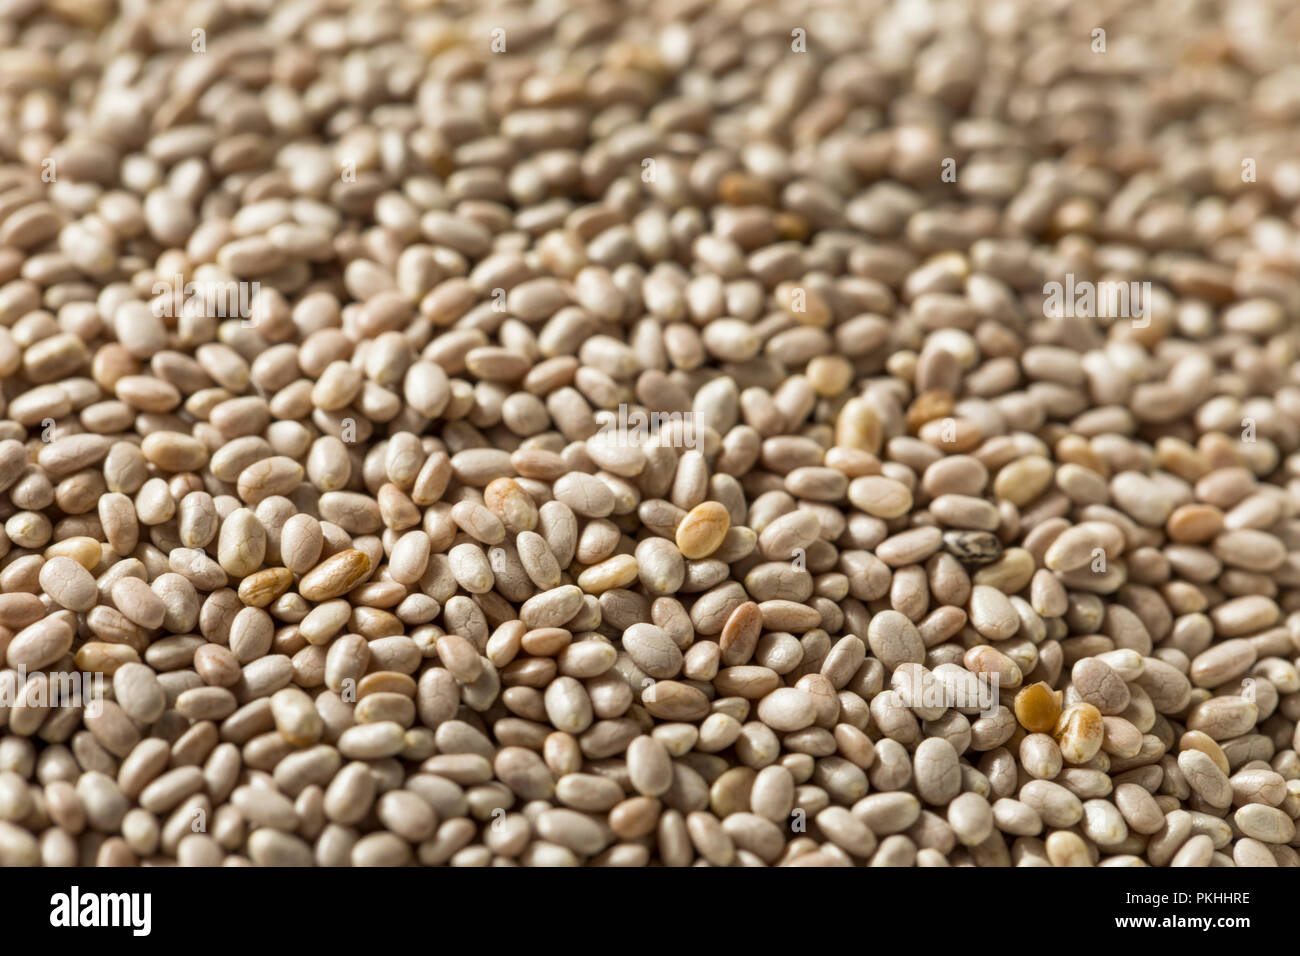 Dry Organic White Chia Seeds in a Bowl Stock Photo